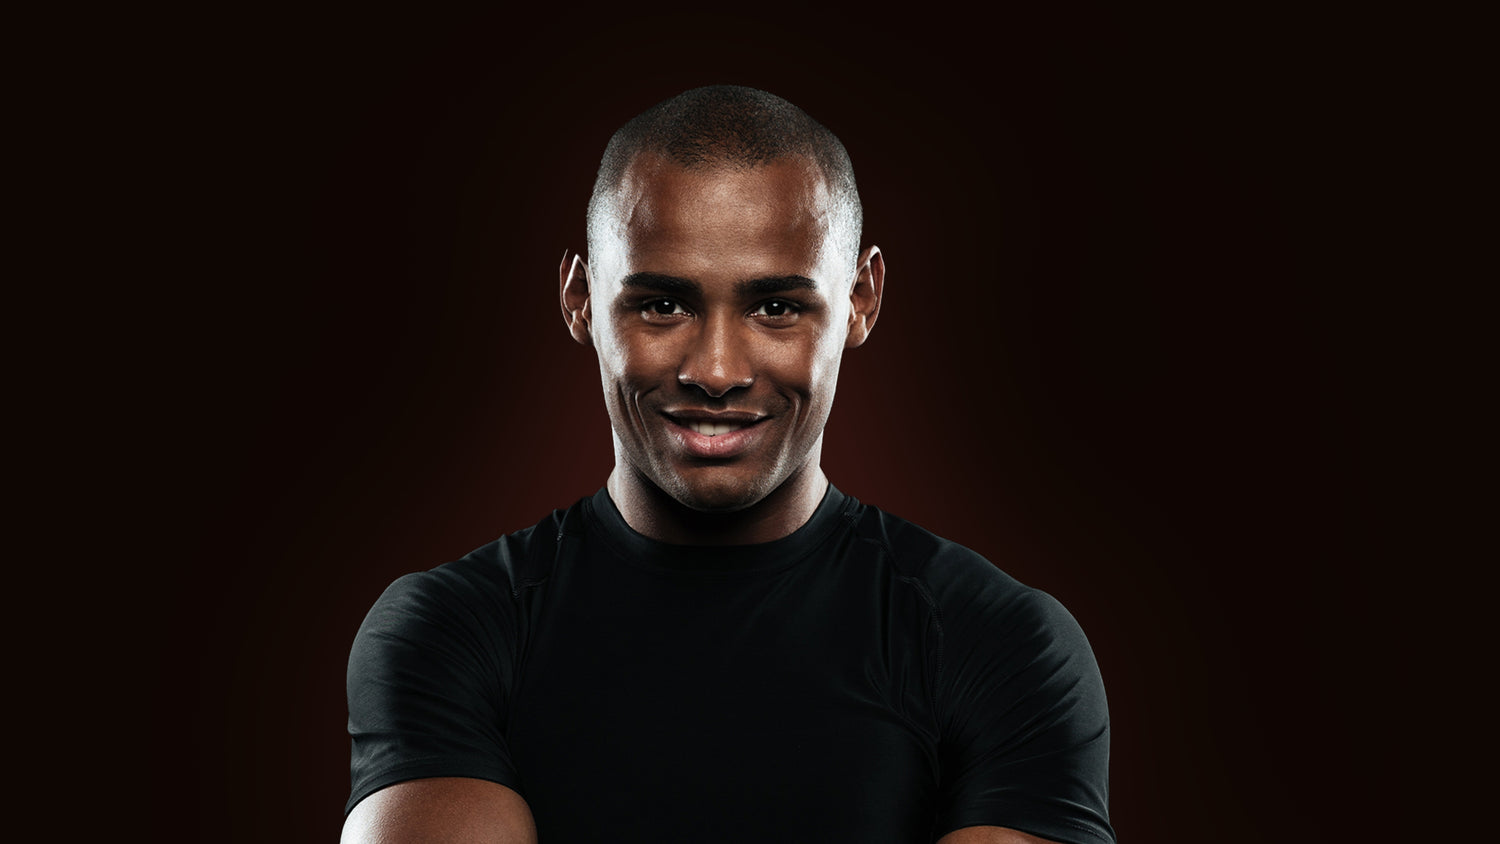 A Black background image of a Happy Confident Man wearing a back T-shirt.